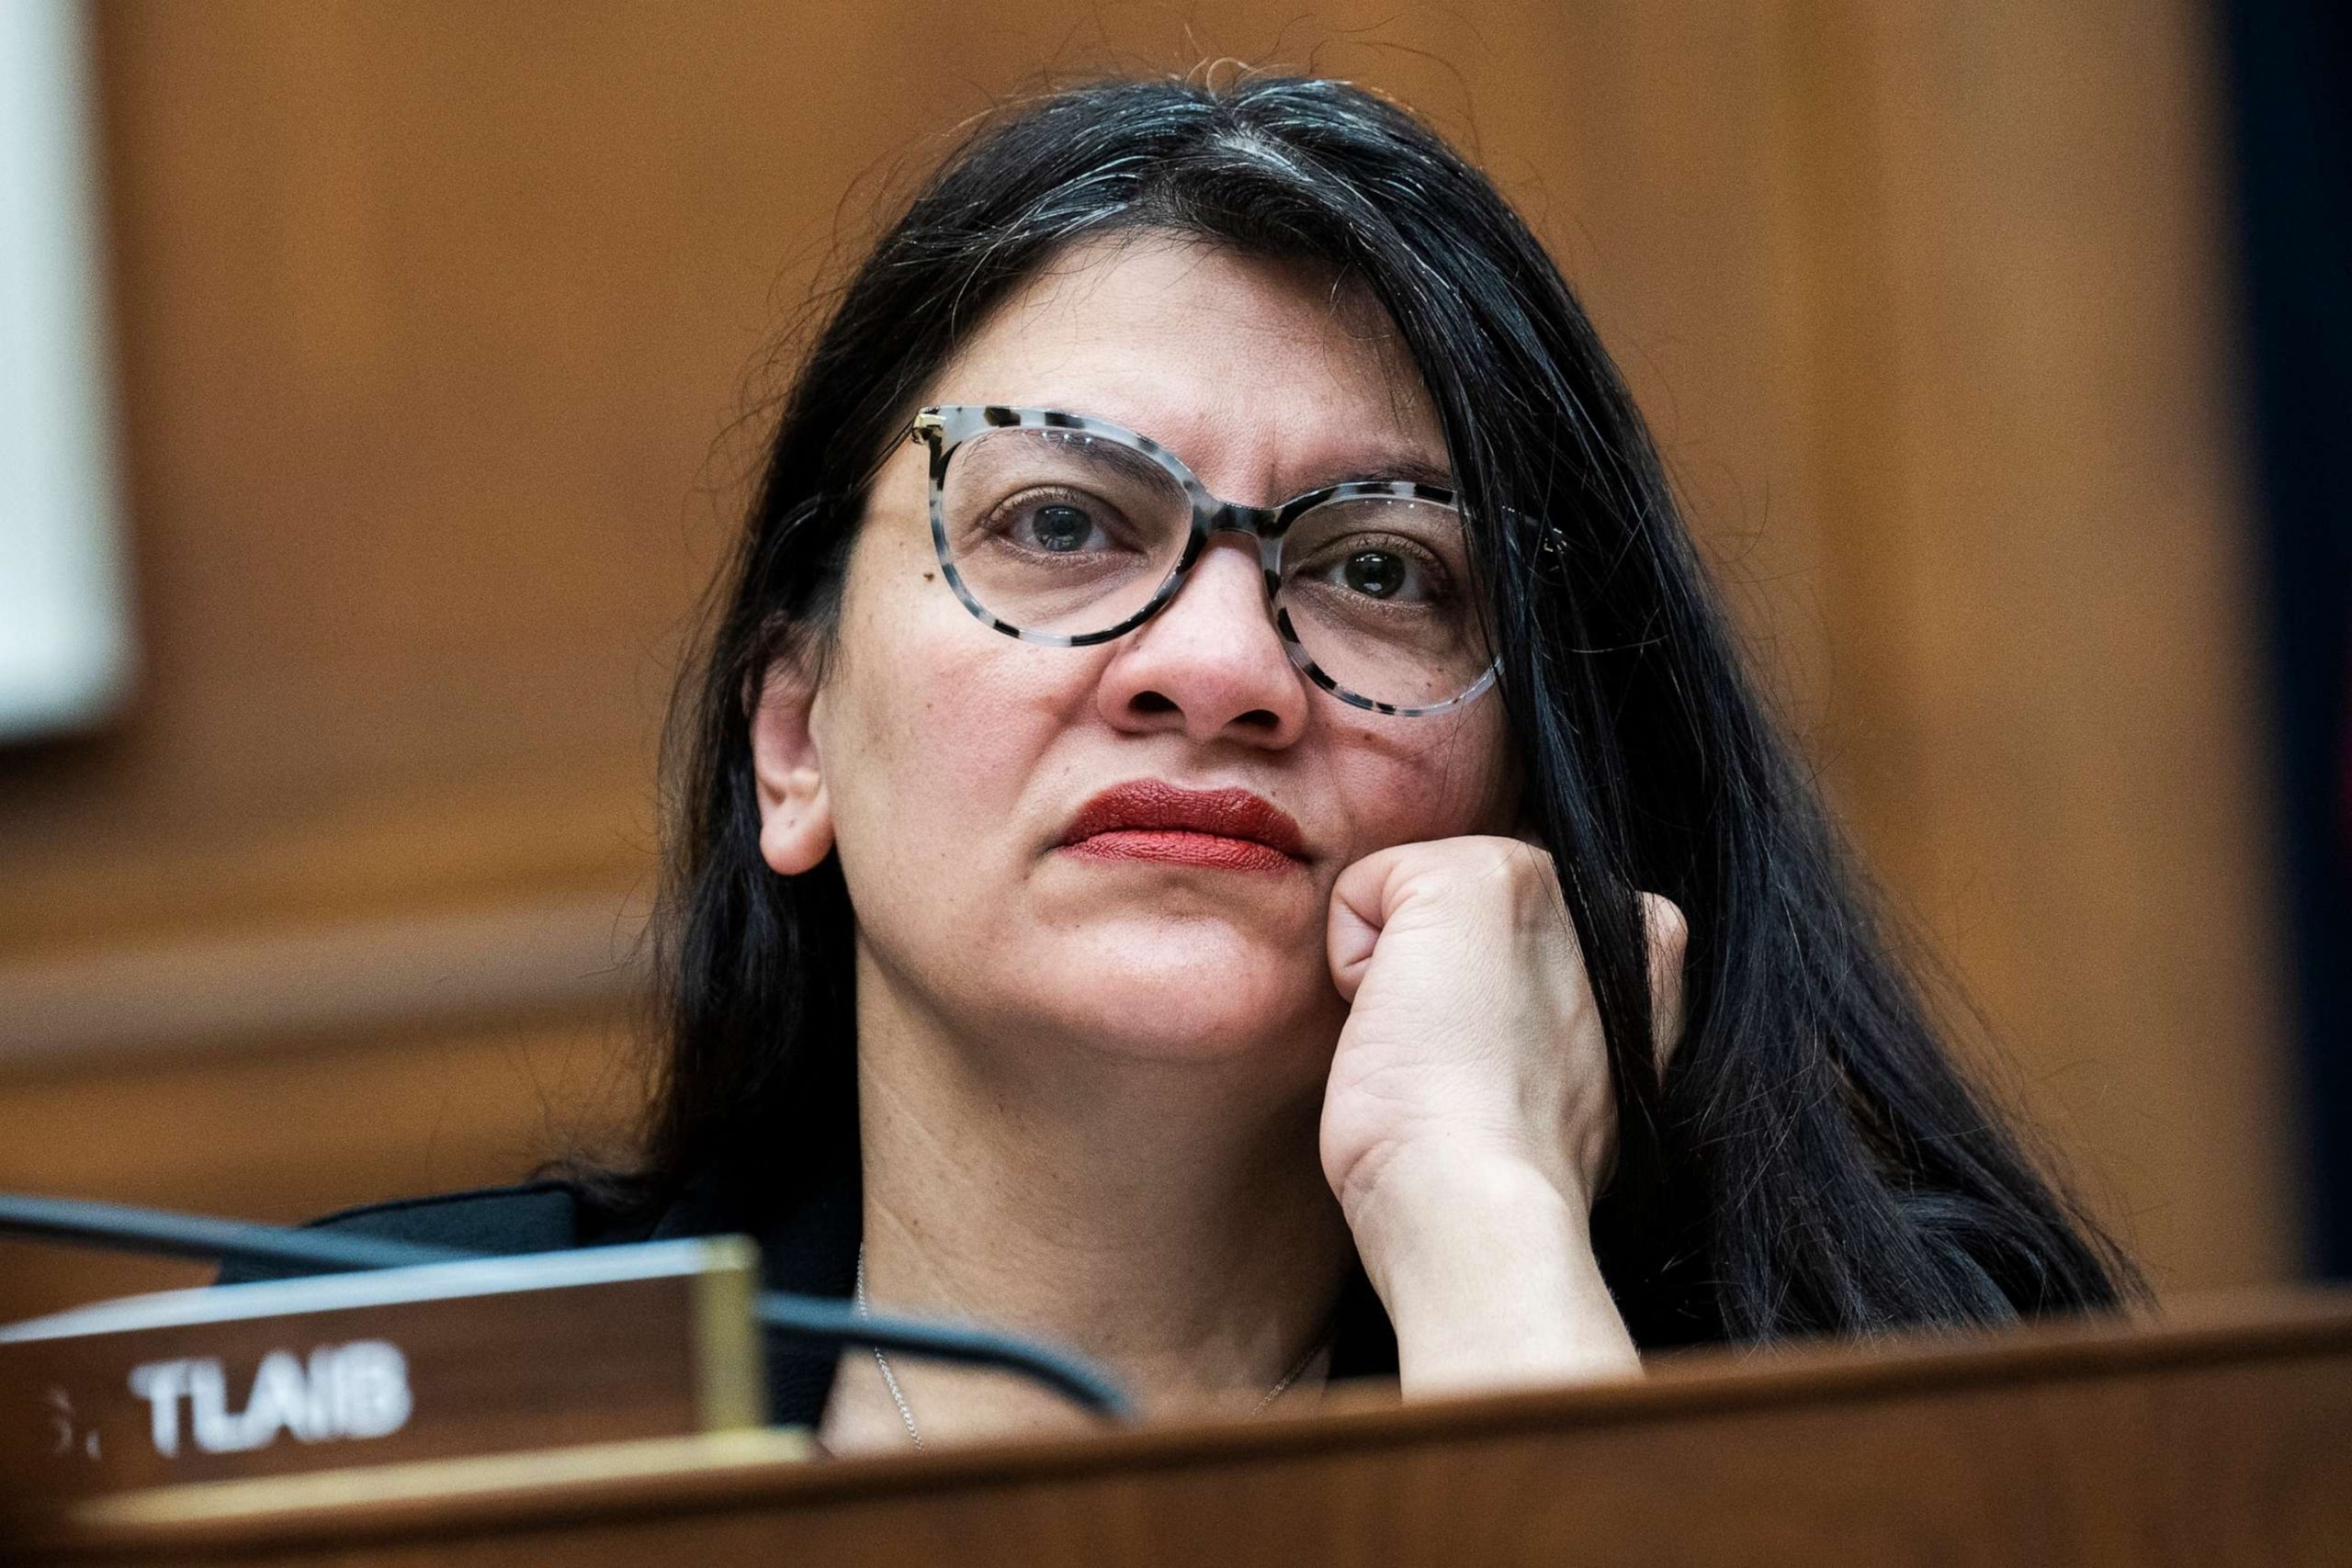 Rep. Rashida Tlaib faces a second censure resolution due to her critique of Israel